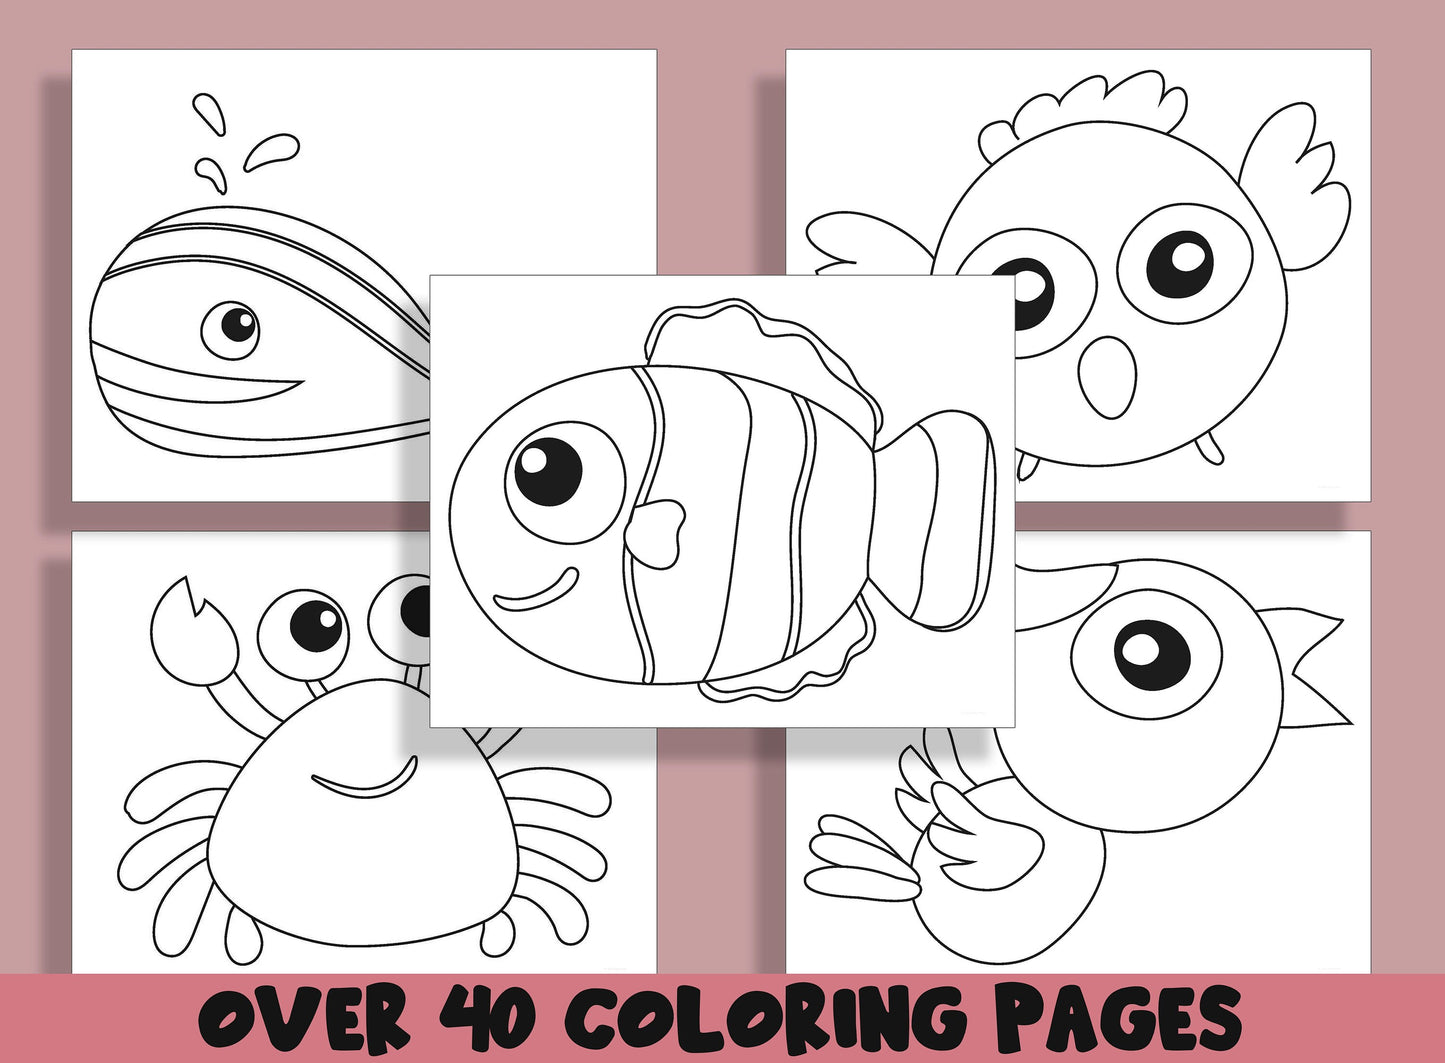 40 Preschool Coloring Pages, Suitable for Toddlers, Preschool, Kindergarten and Early Elementary Kids.